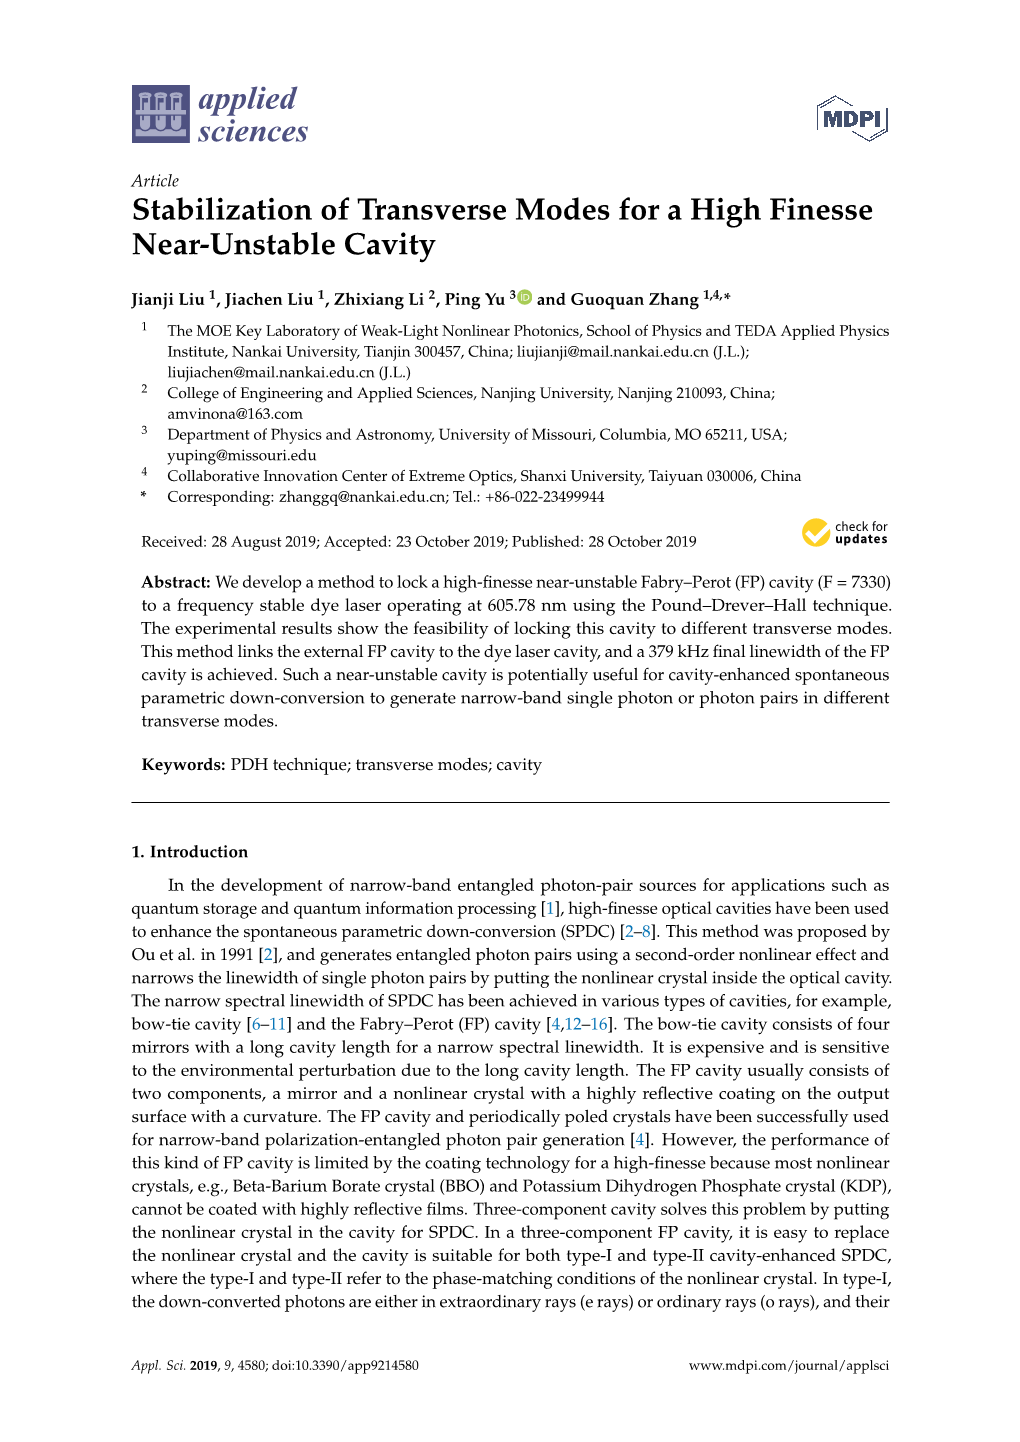 Stabilization of Transverse Modes for a High Finesse Near-Unstable Cavity